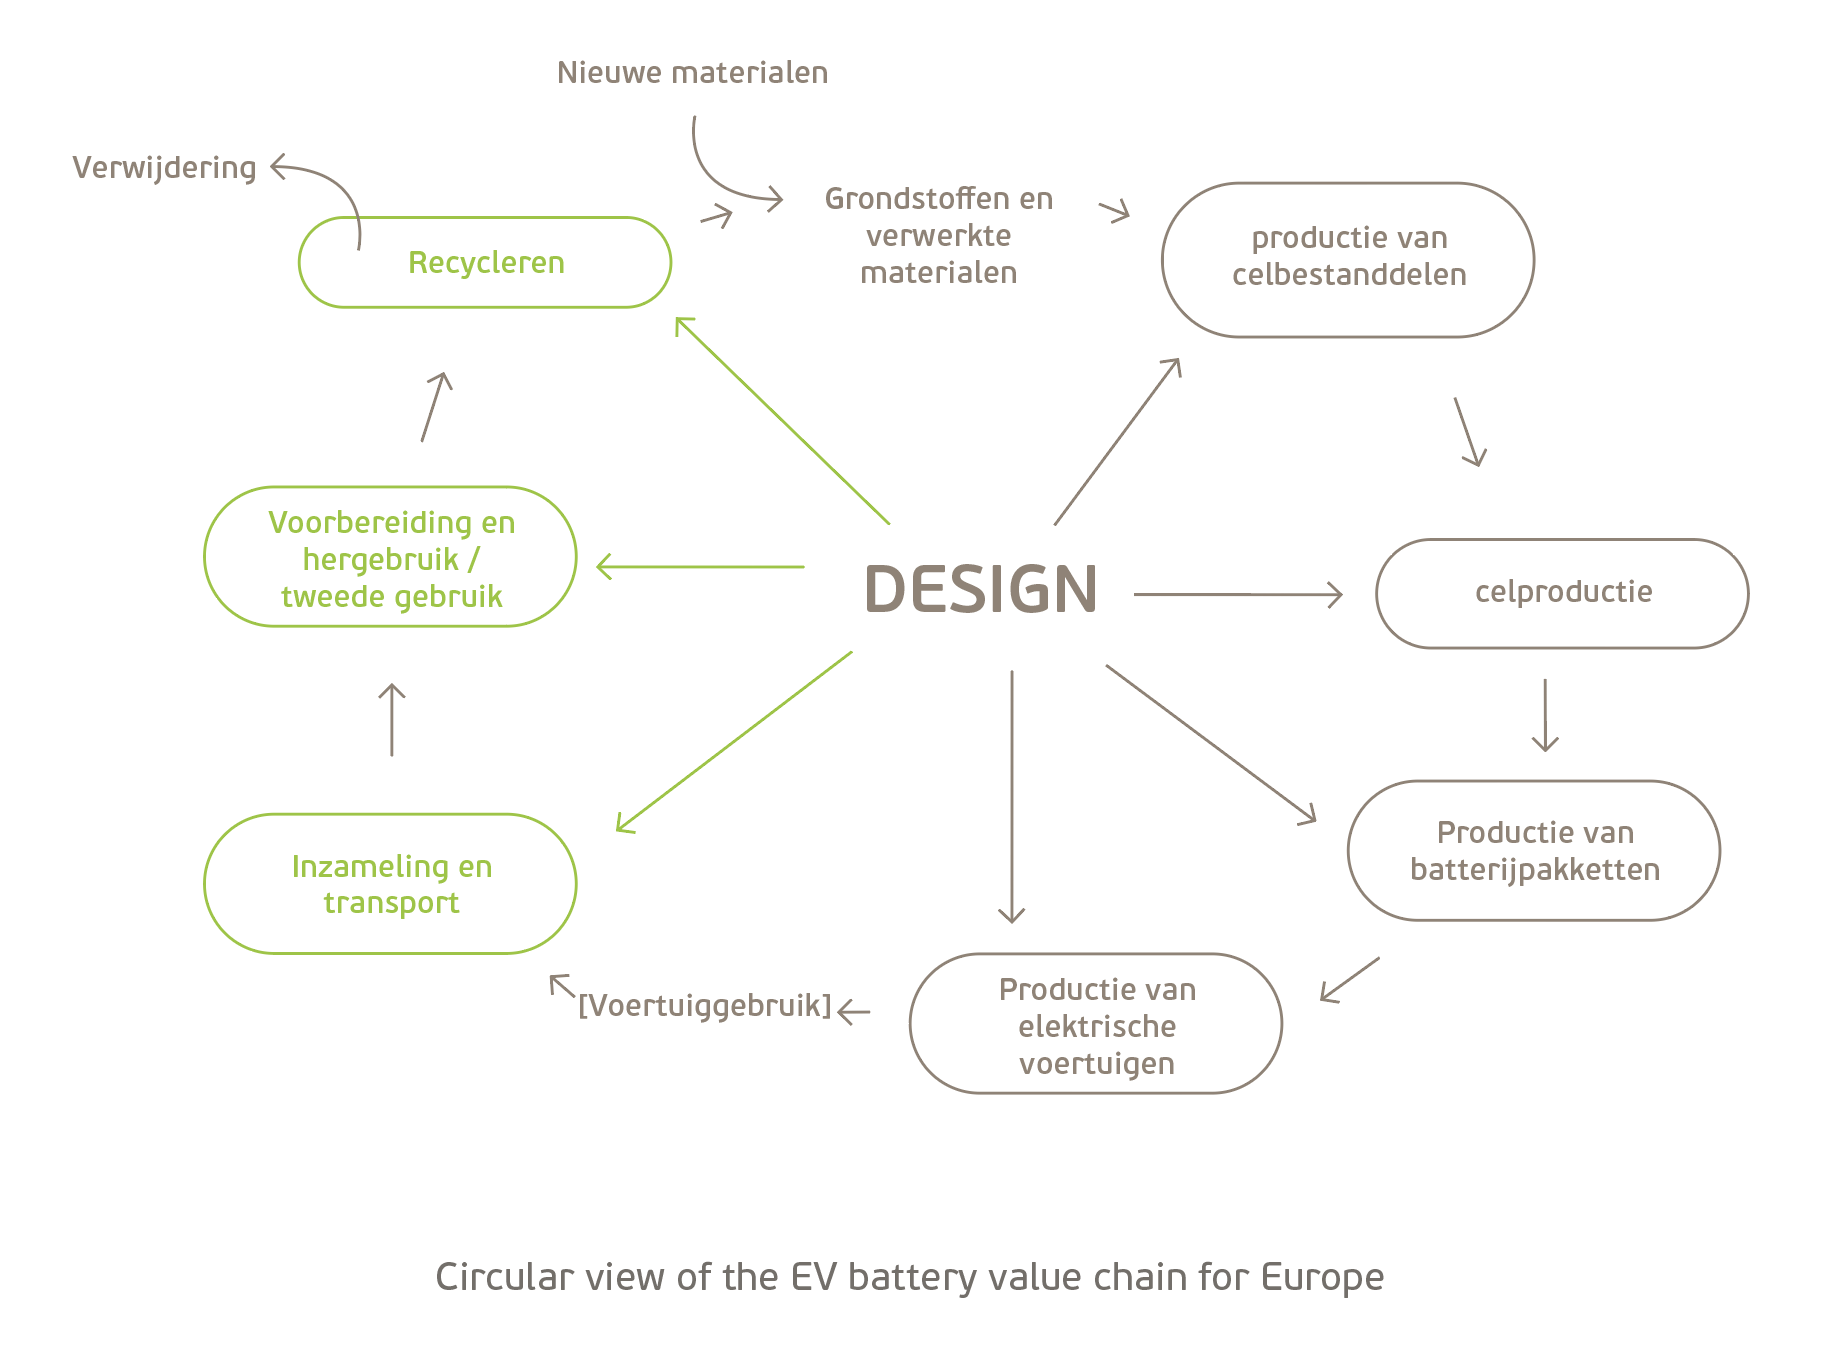 Circular view of the EV battery value chain for Europe